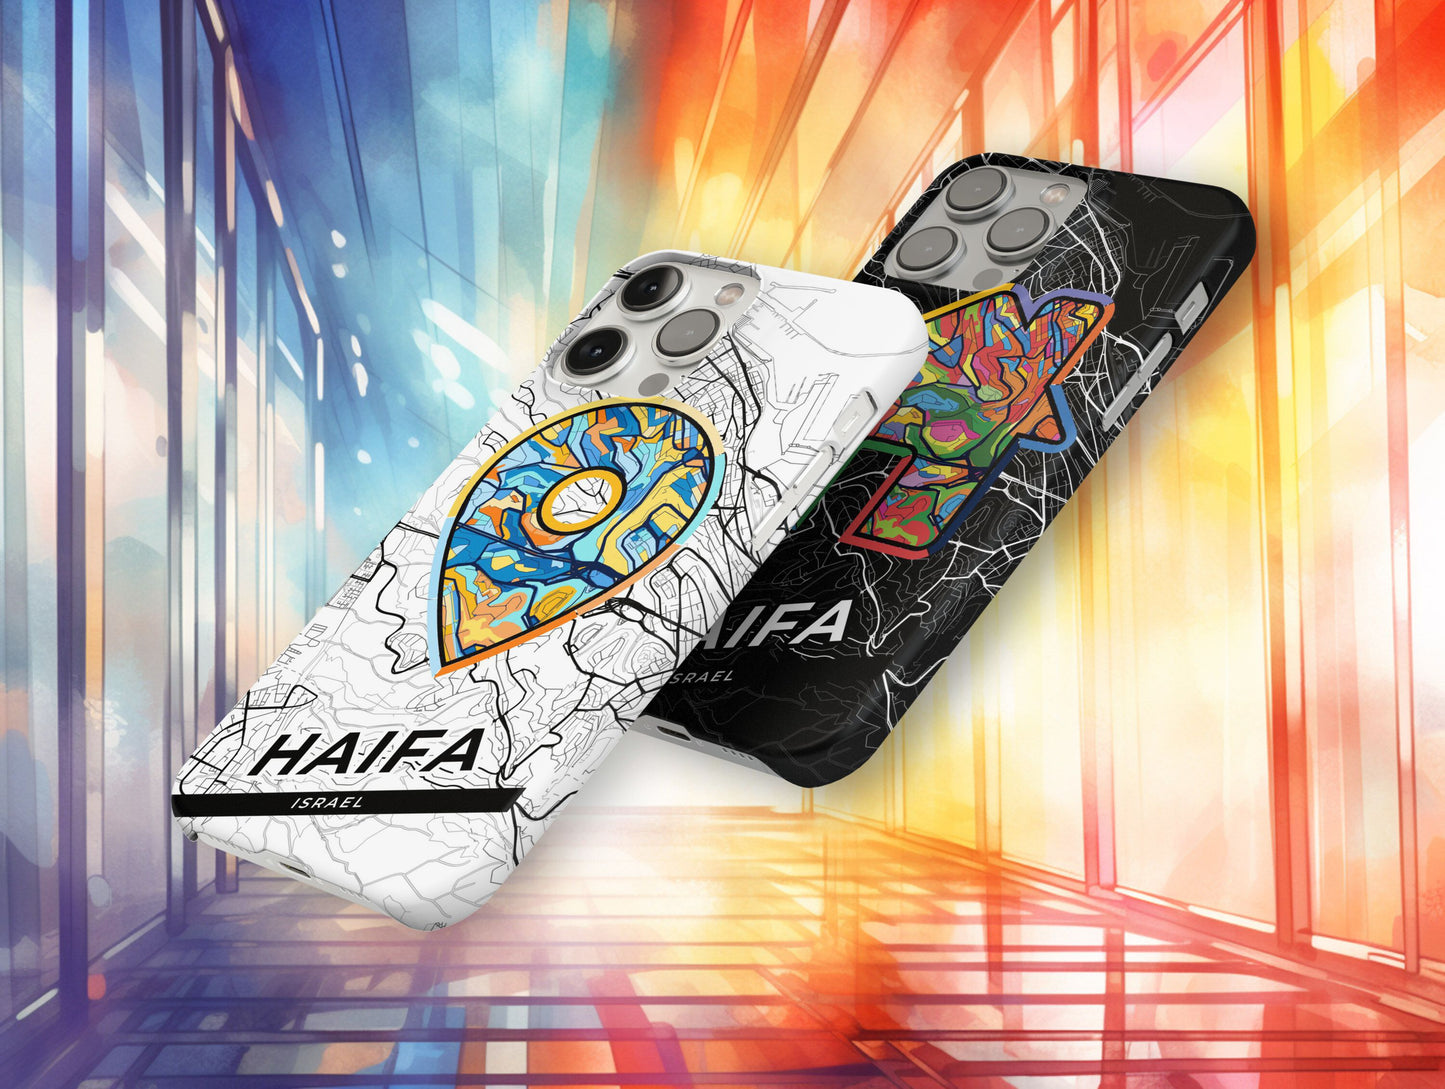 Haifa Israel slim phone case with colorful icon. Birthday, wedding or housewarming gift. Couple match cases.